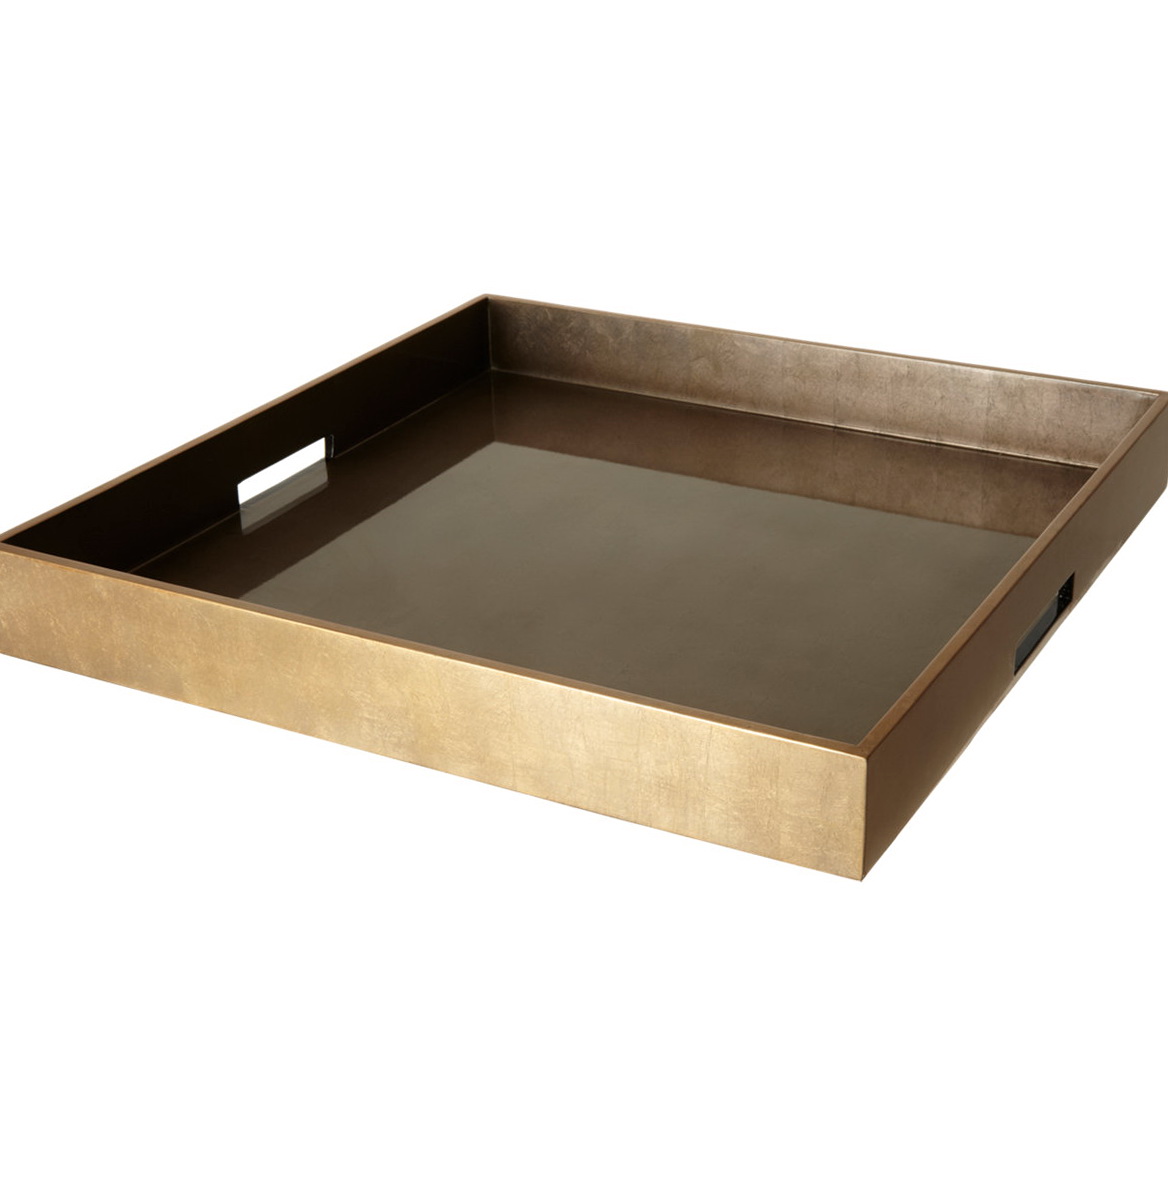 Mold Market Mold Large Square Tray | Natures Garden Soap